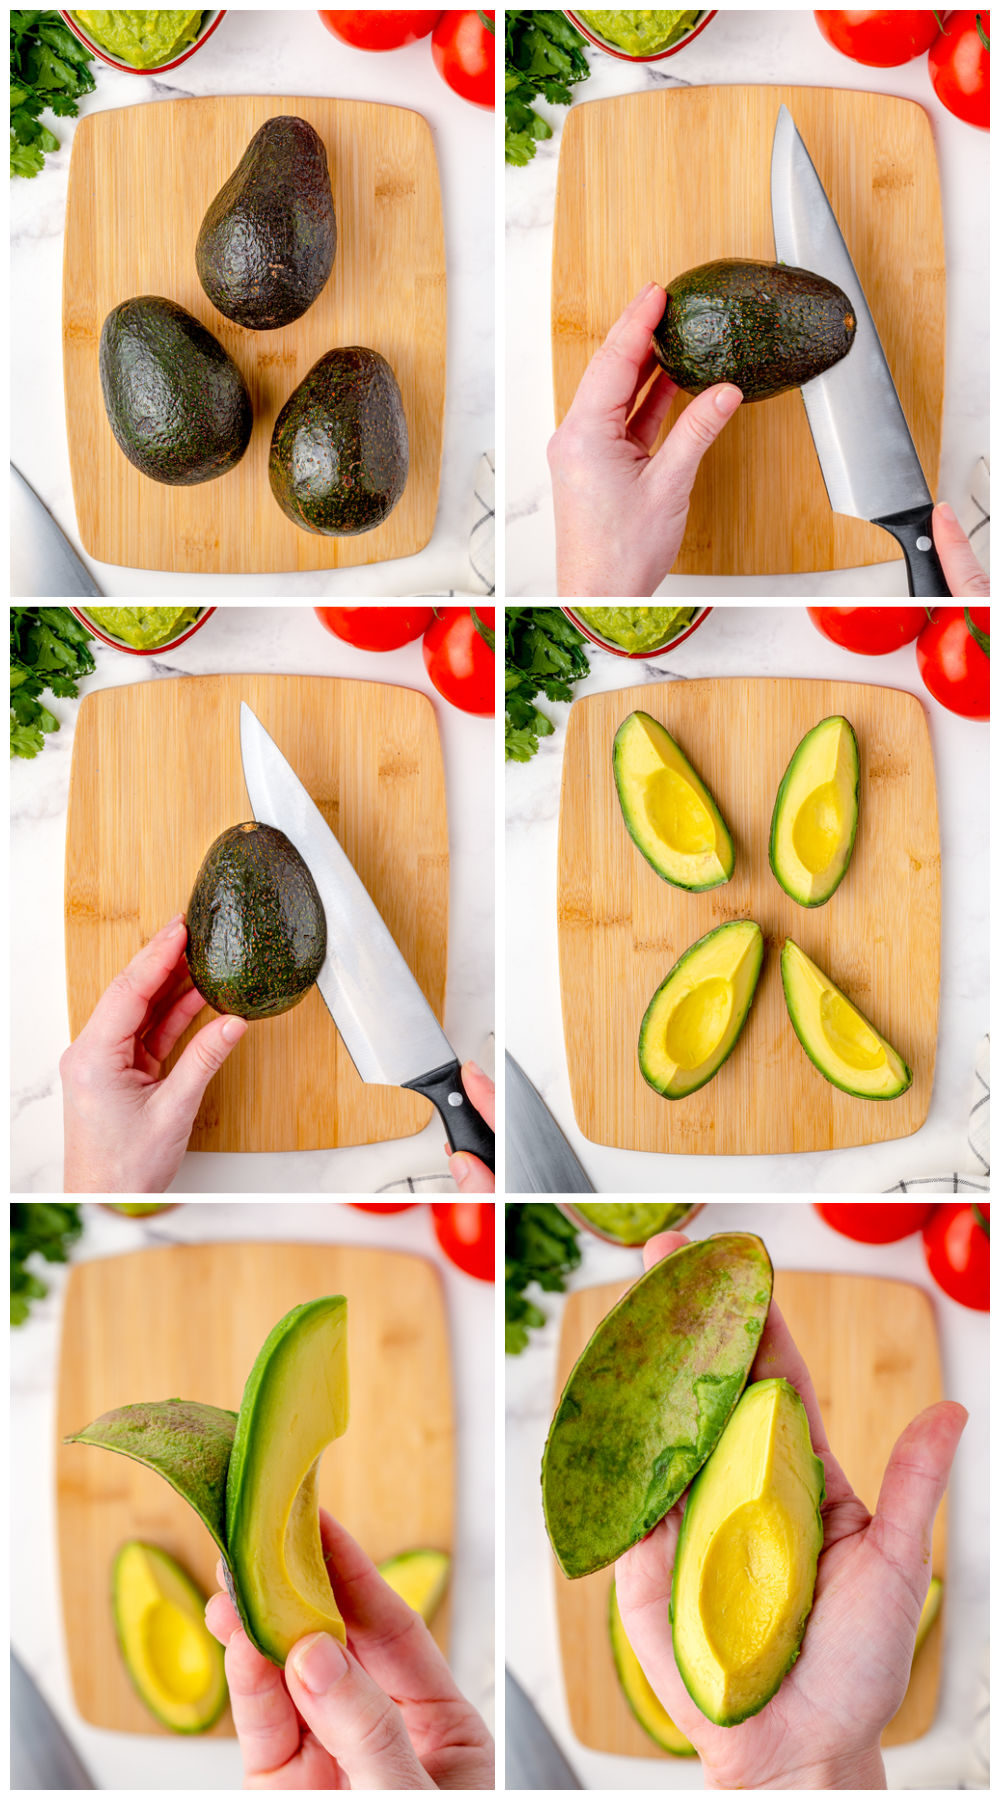 A picture collage showing how to How To Cut And Peel An Avocado.